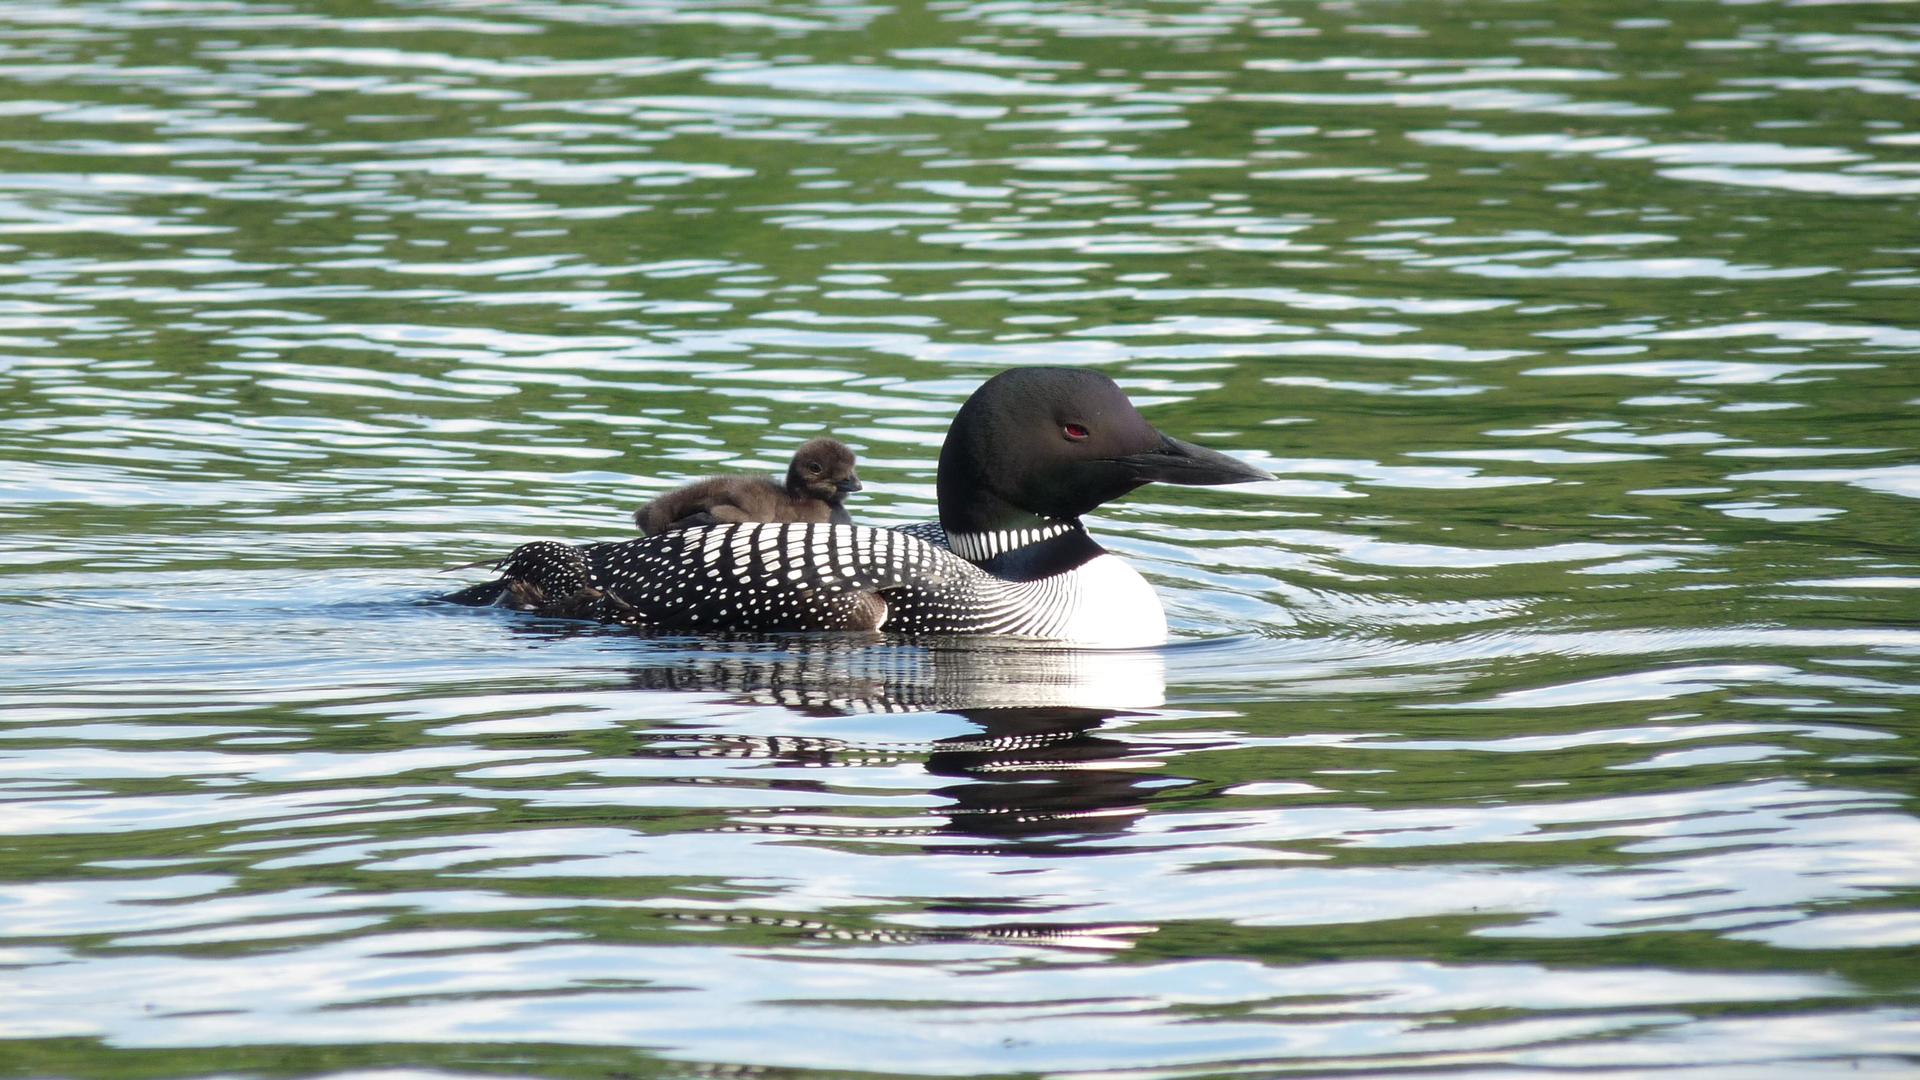 In 2010, Noreen Dertinger finally spotted her first loon chick on Lake Kennebec. Unfortunately, it did not survive the year.